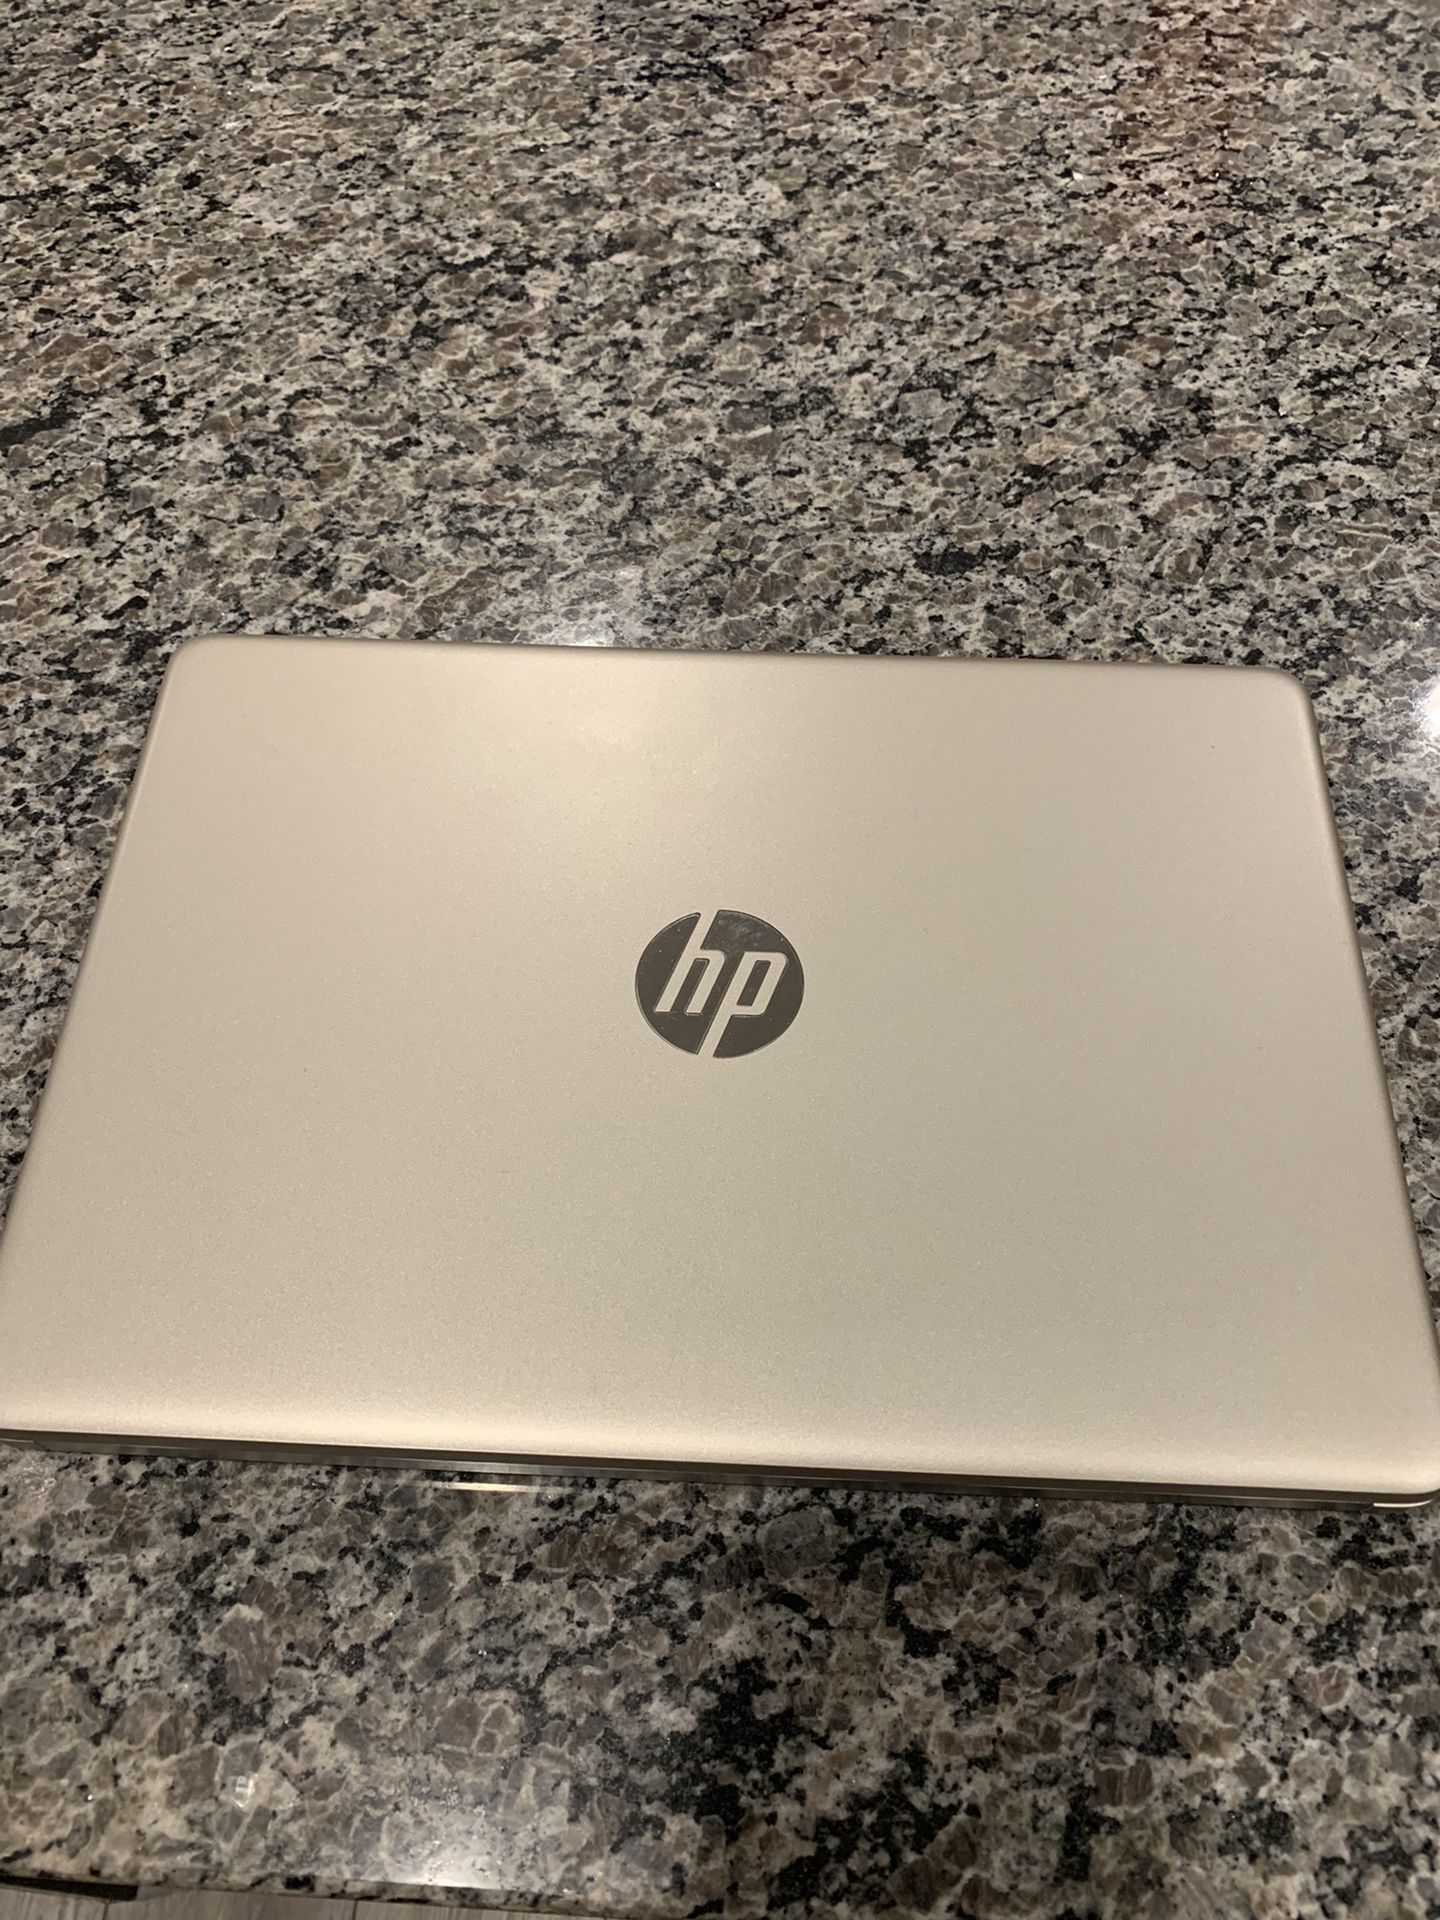 HP 14” Laptop- Intel Core i3-4GB memory- 128 GB Solid State Drive w/ Microsoft Office key added